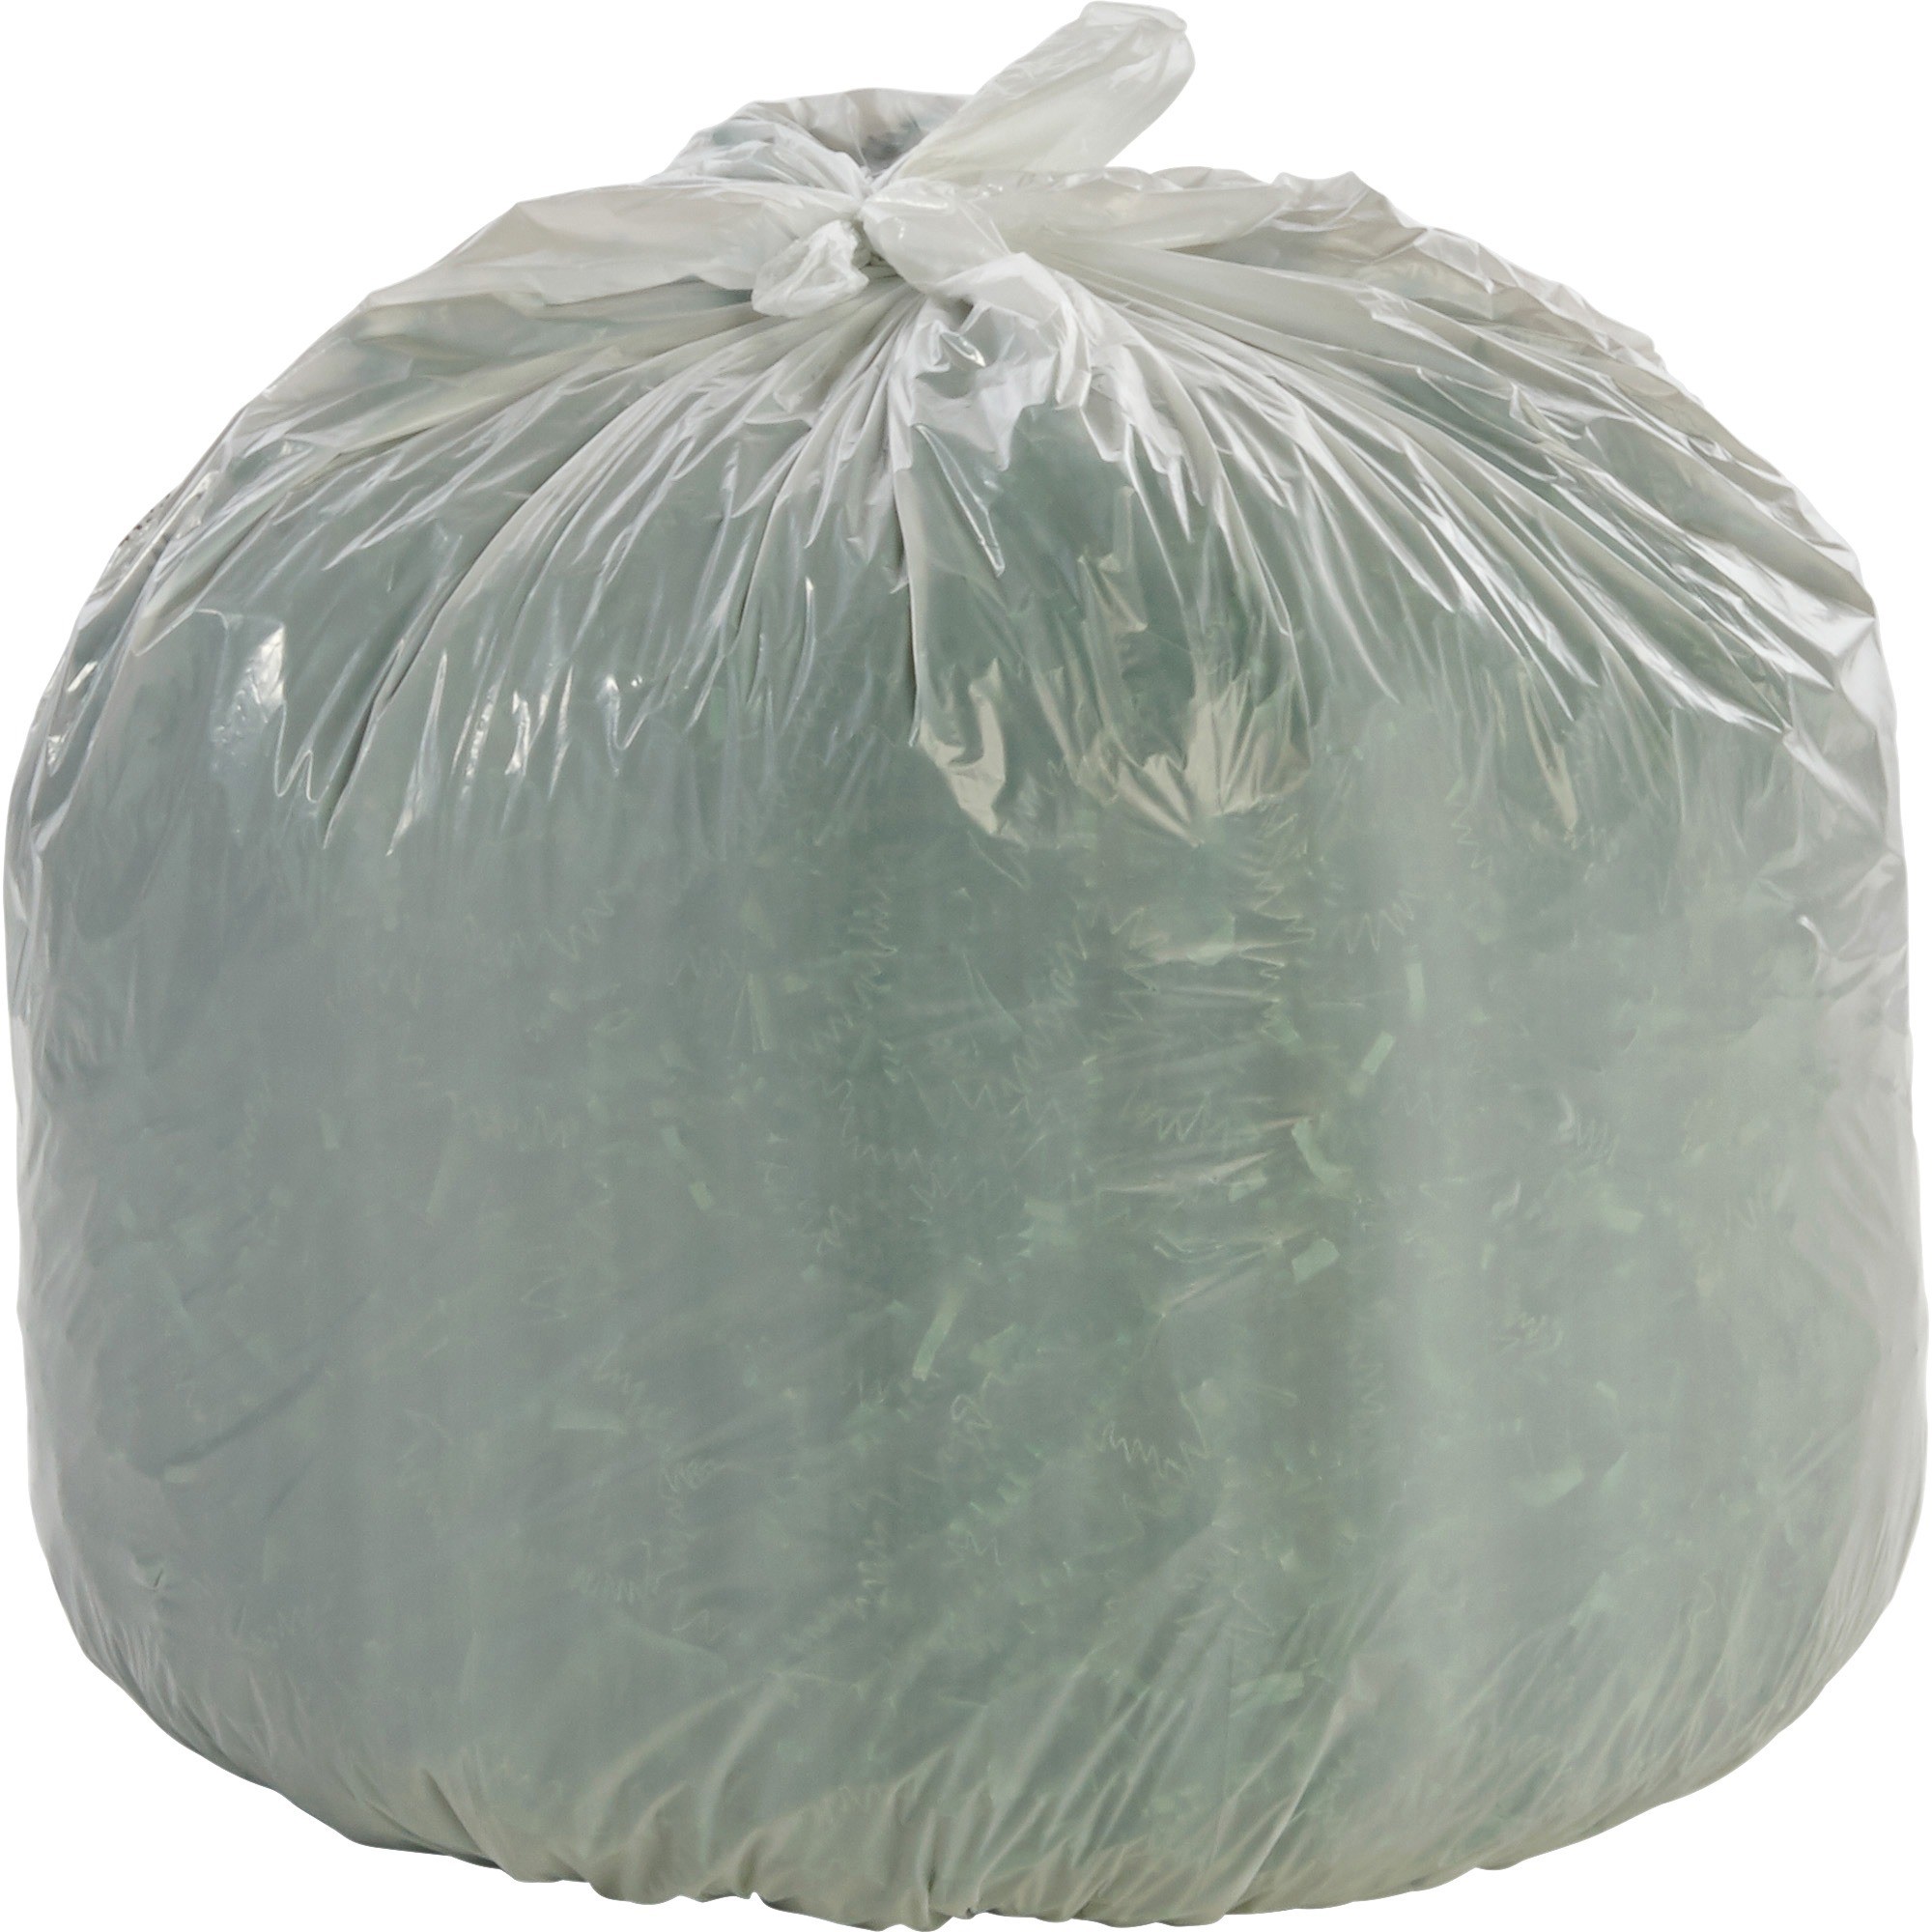 Stout Controlled Life-Cycle Plastic Trash Bags - 13 gal Capacity - 24" Width x 30" Length - 0.70 mil (18 Micron) Thickness - Whi